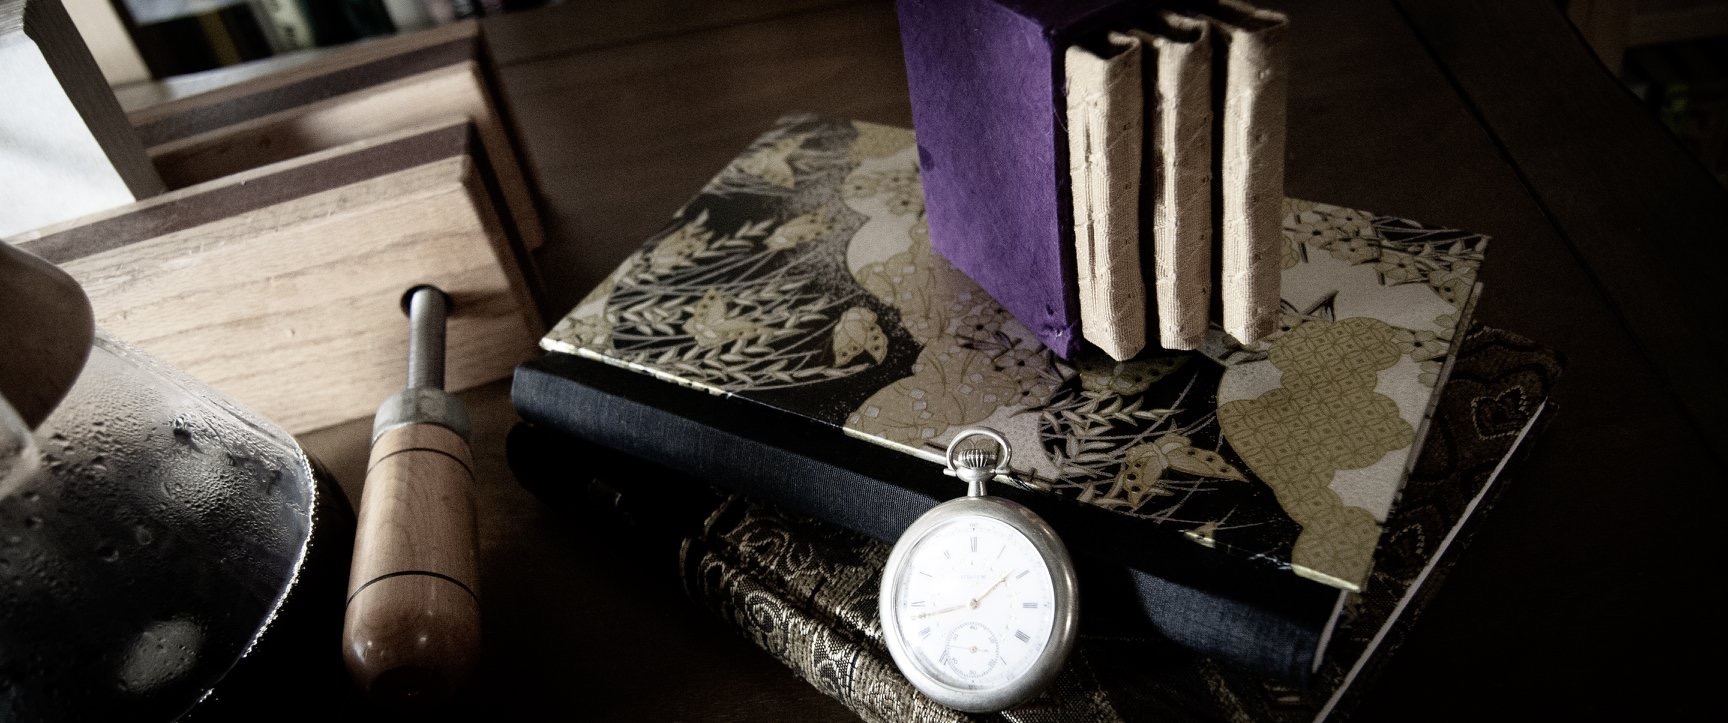 Still life with books and pocket watch